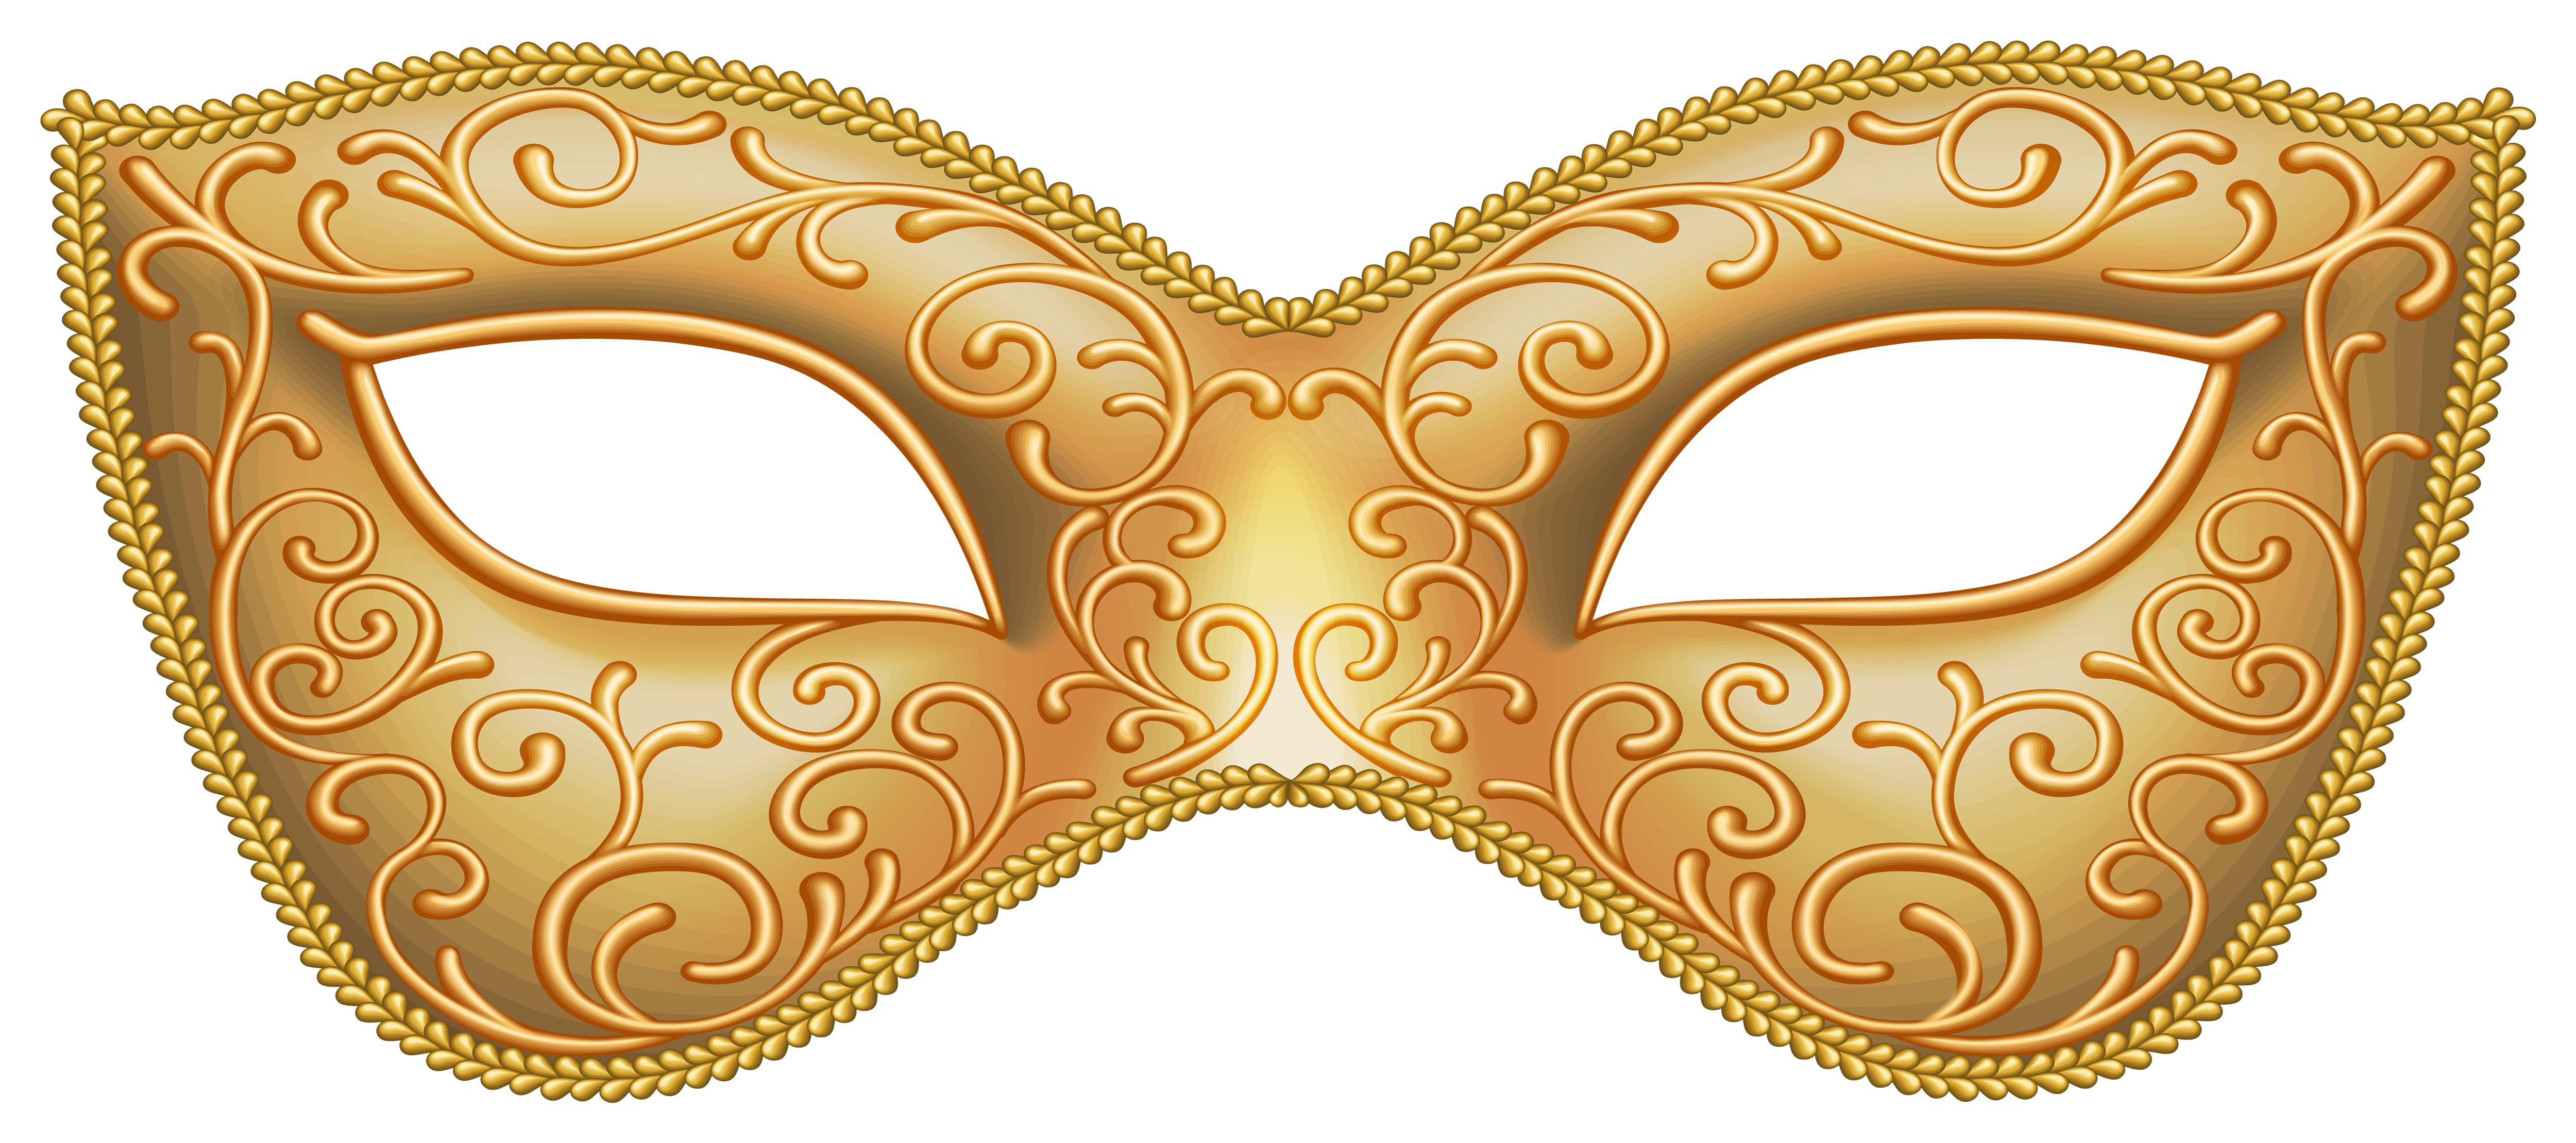 Gold Carnival Mask Transparent Image | Gallery Yopriceville - High